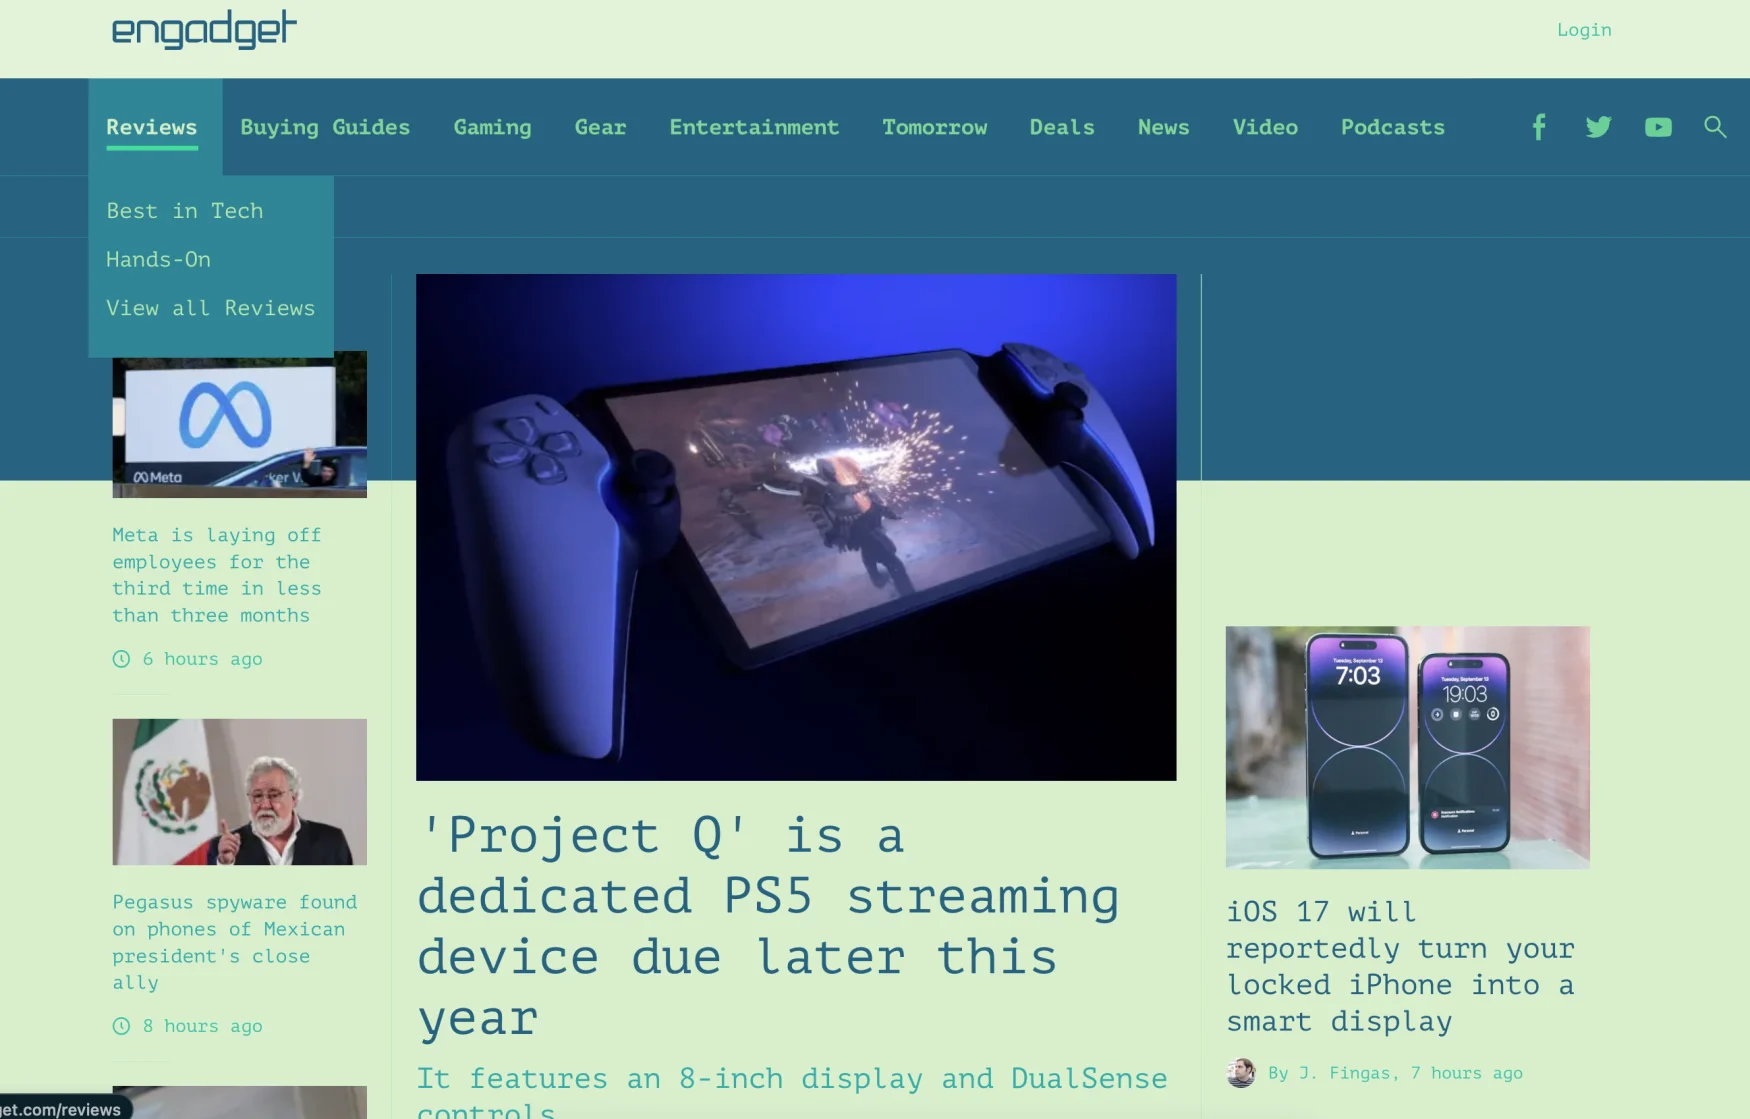 Engadget homepage with Arc browser